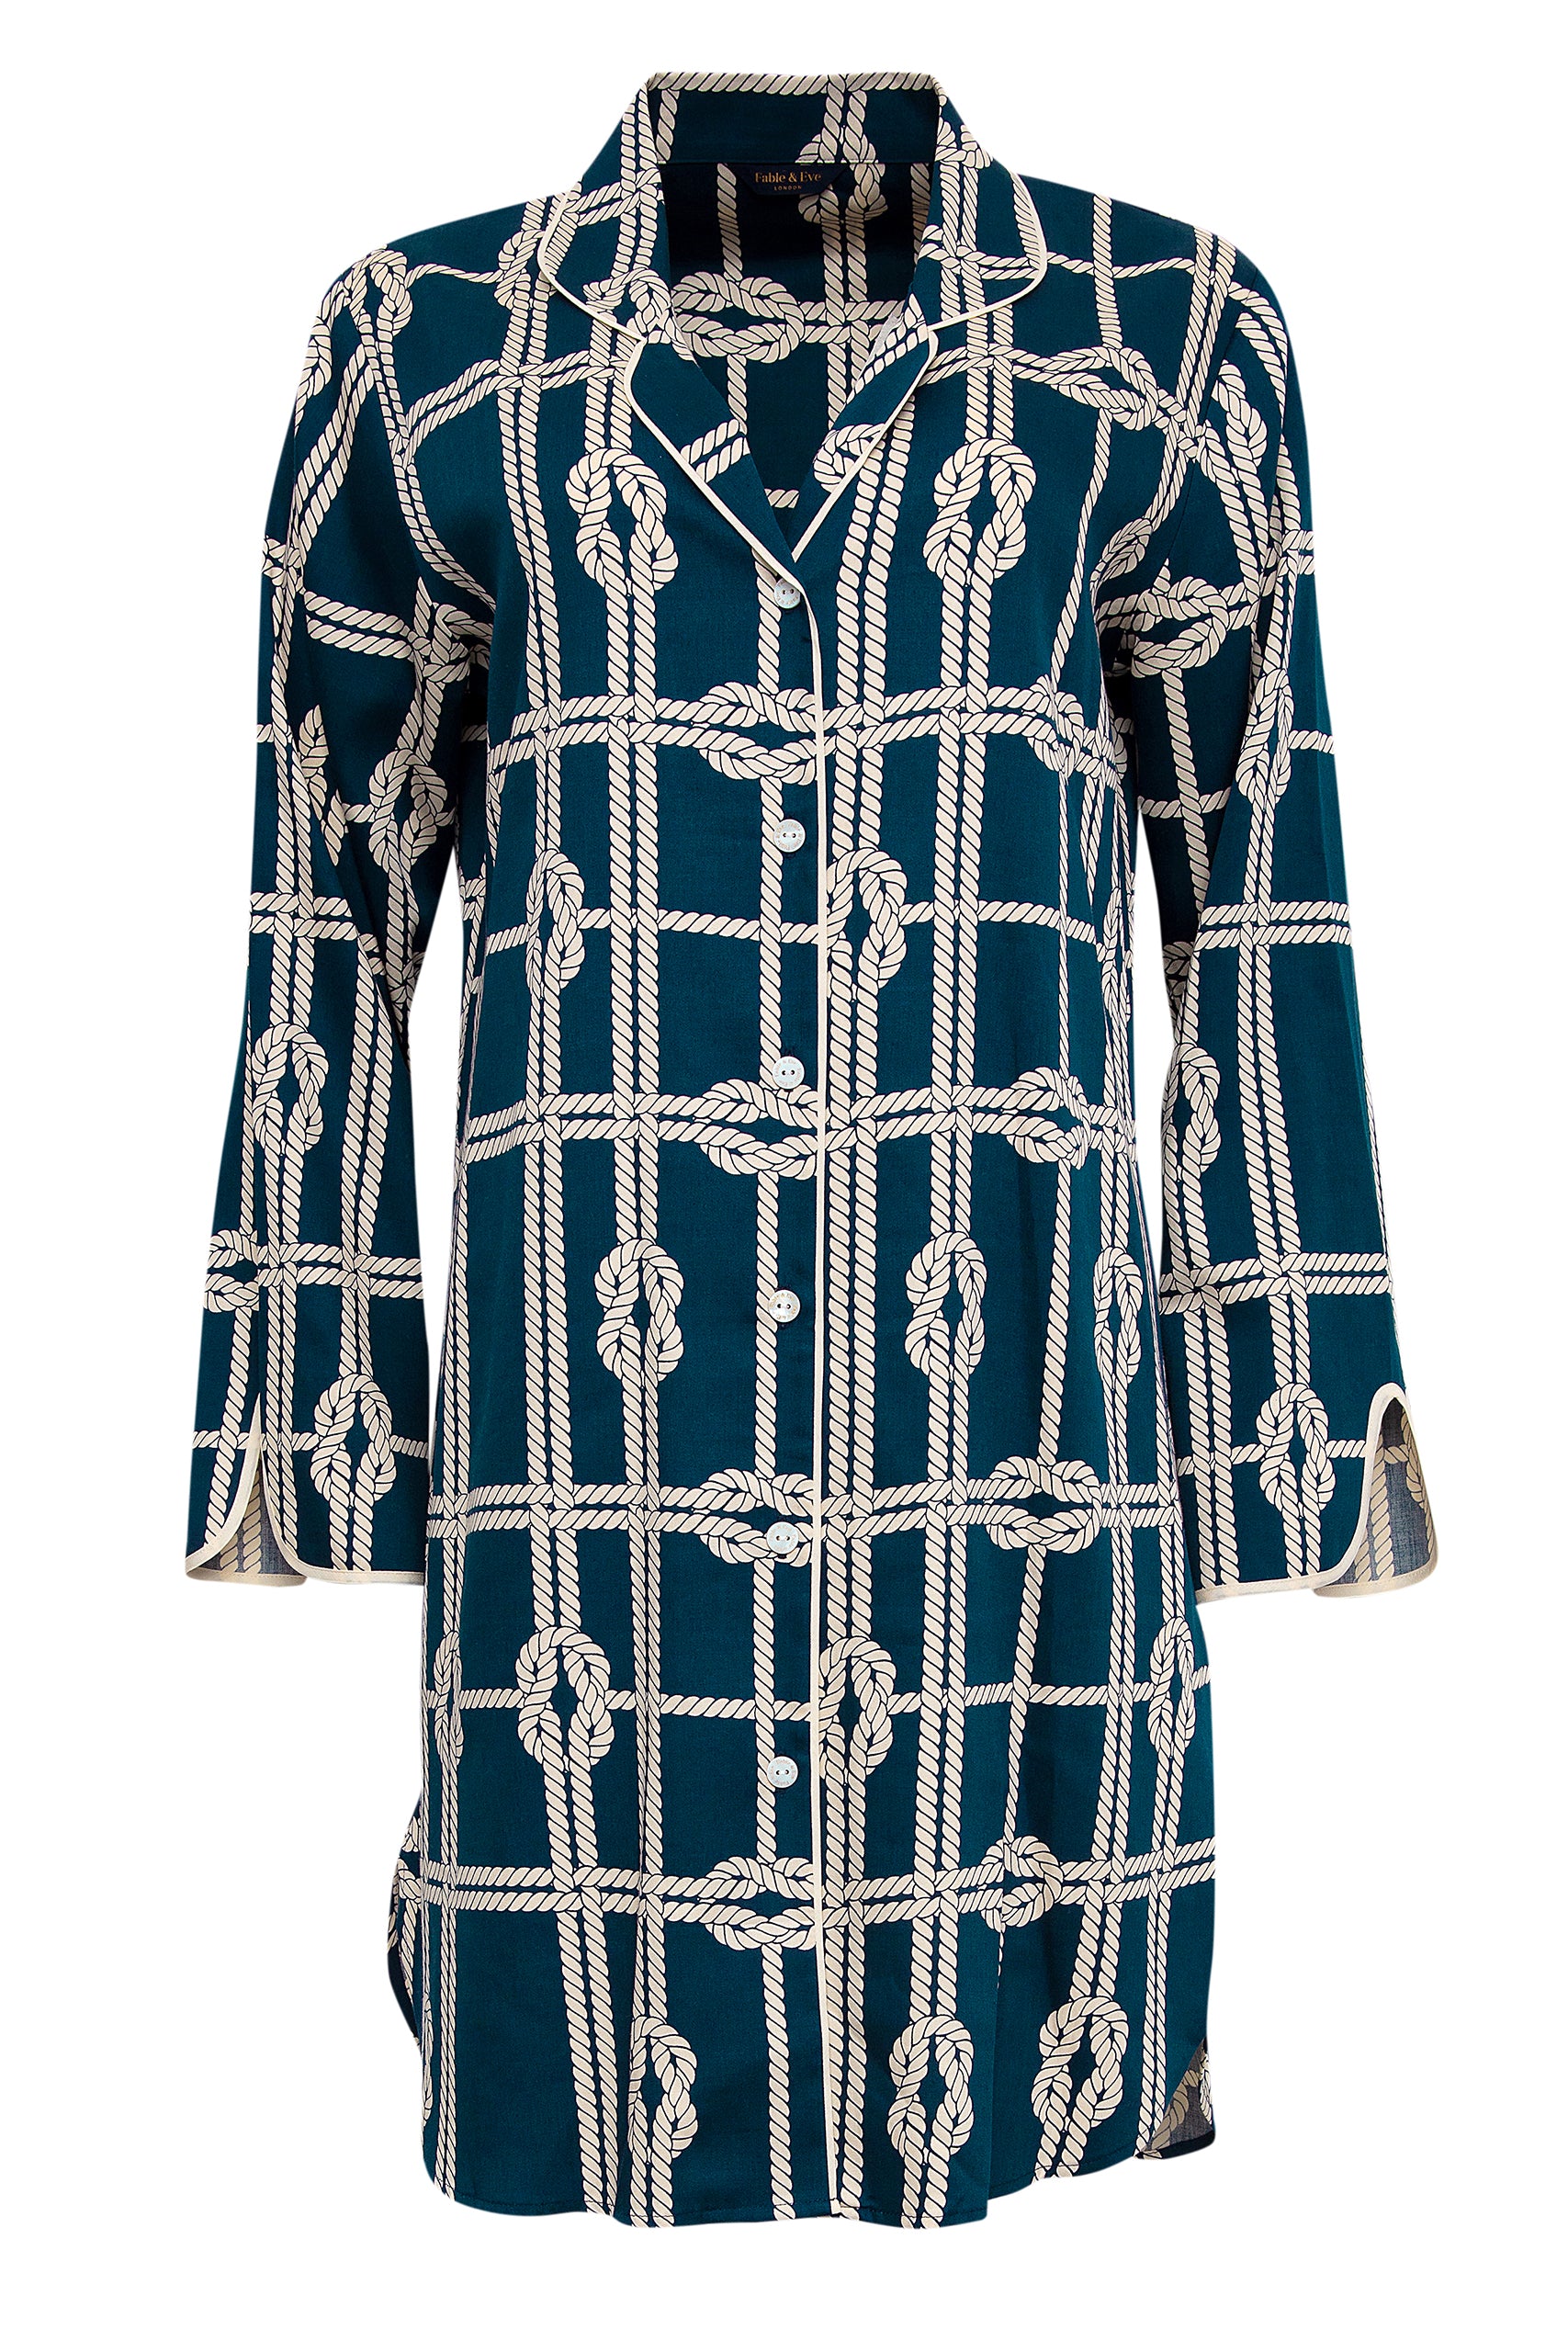 Spitalfields Rope Print Nightshirt - Fable and Eve